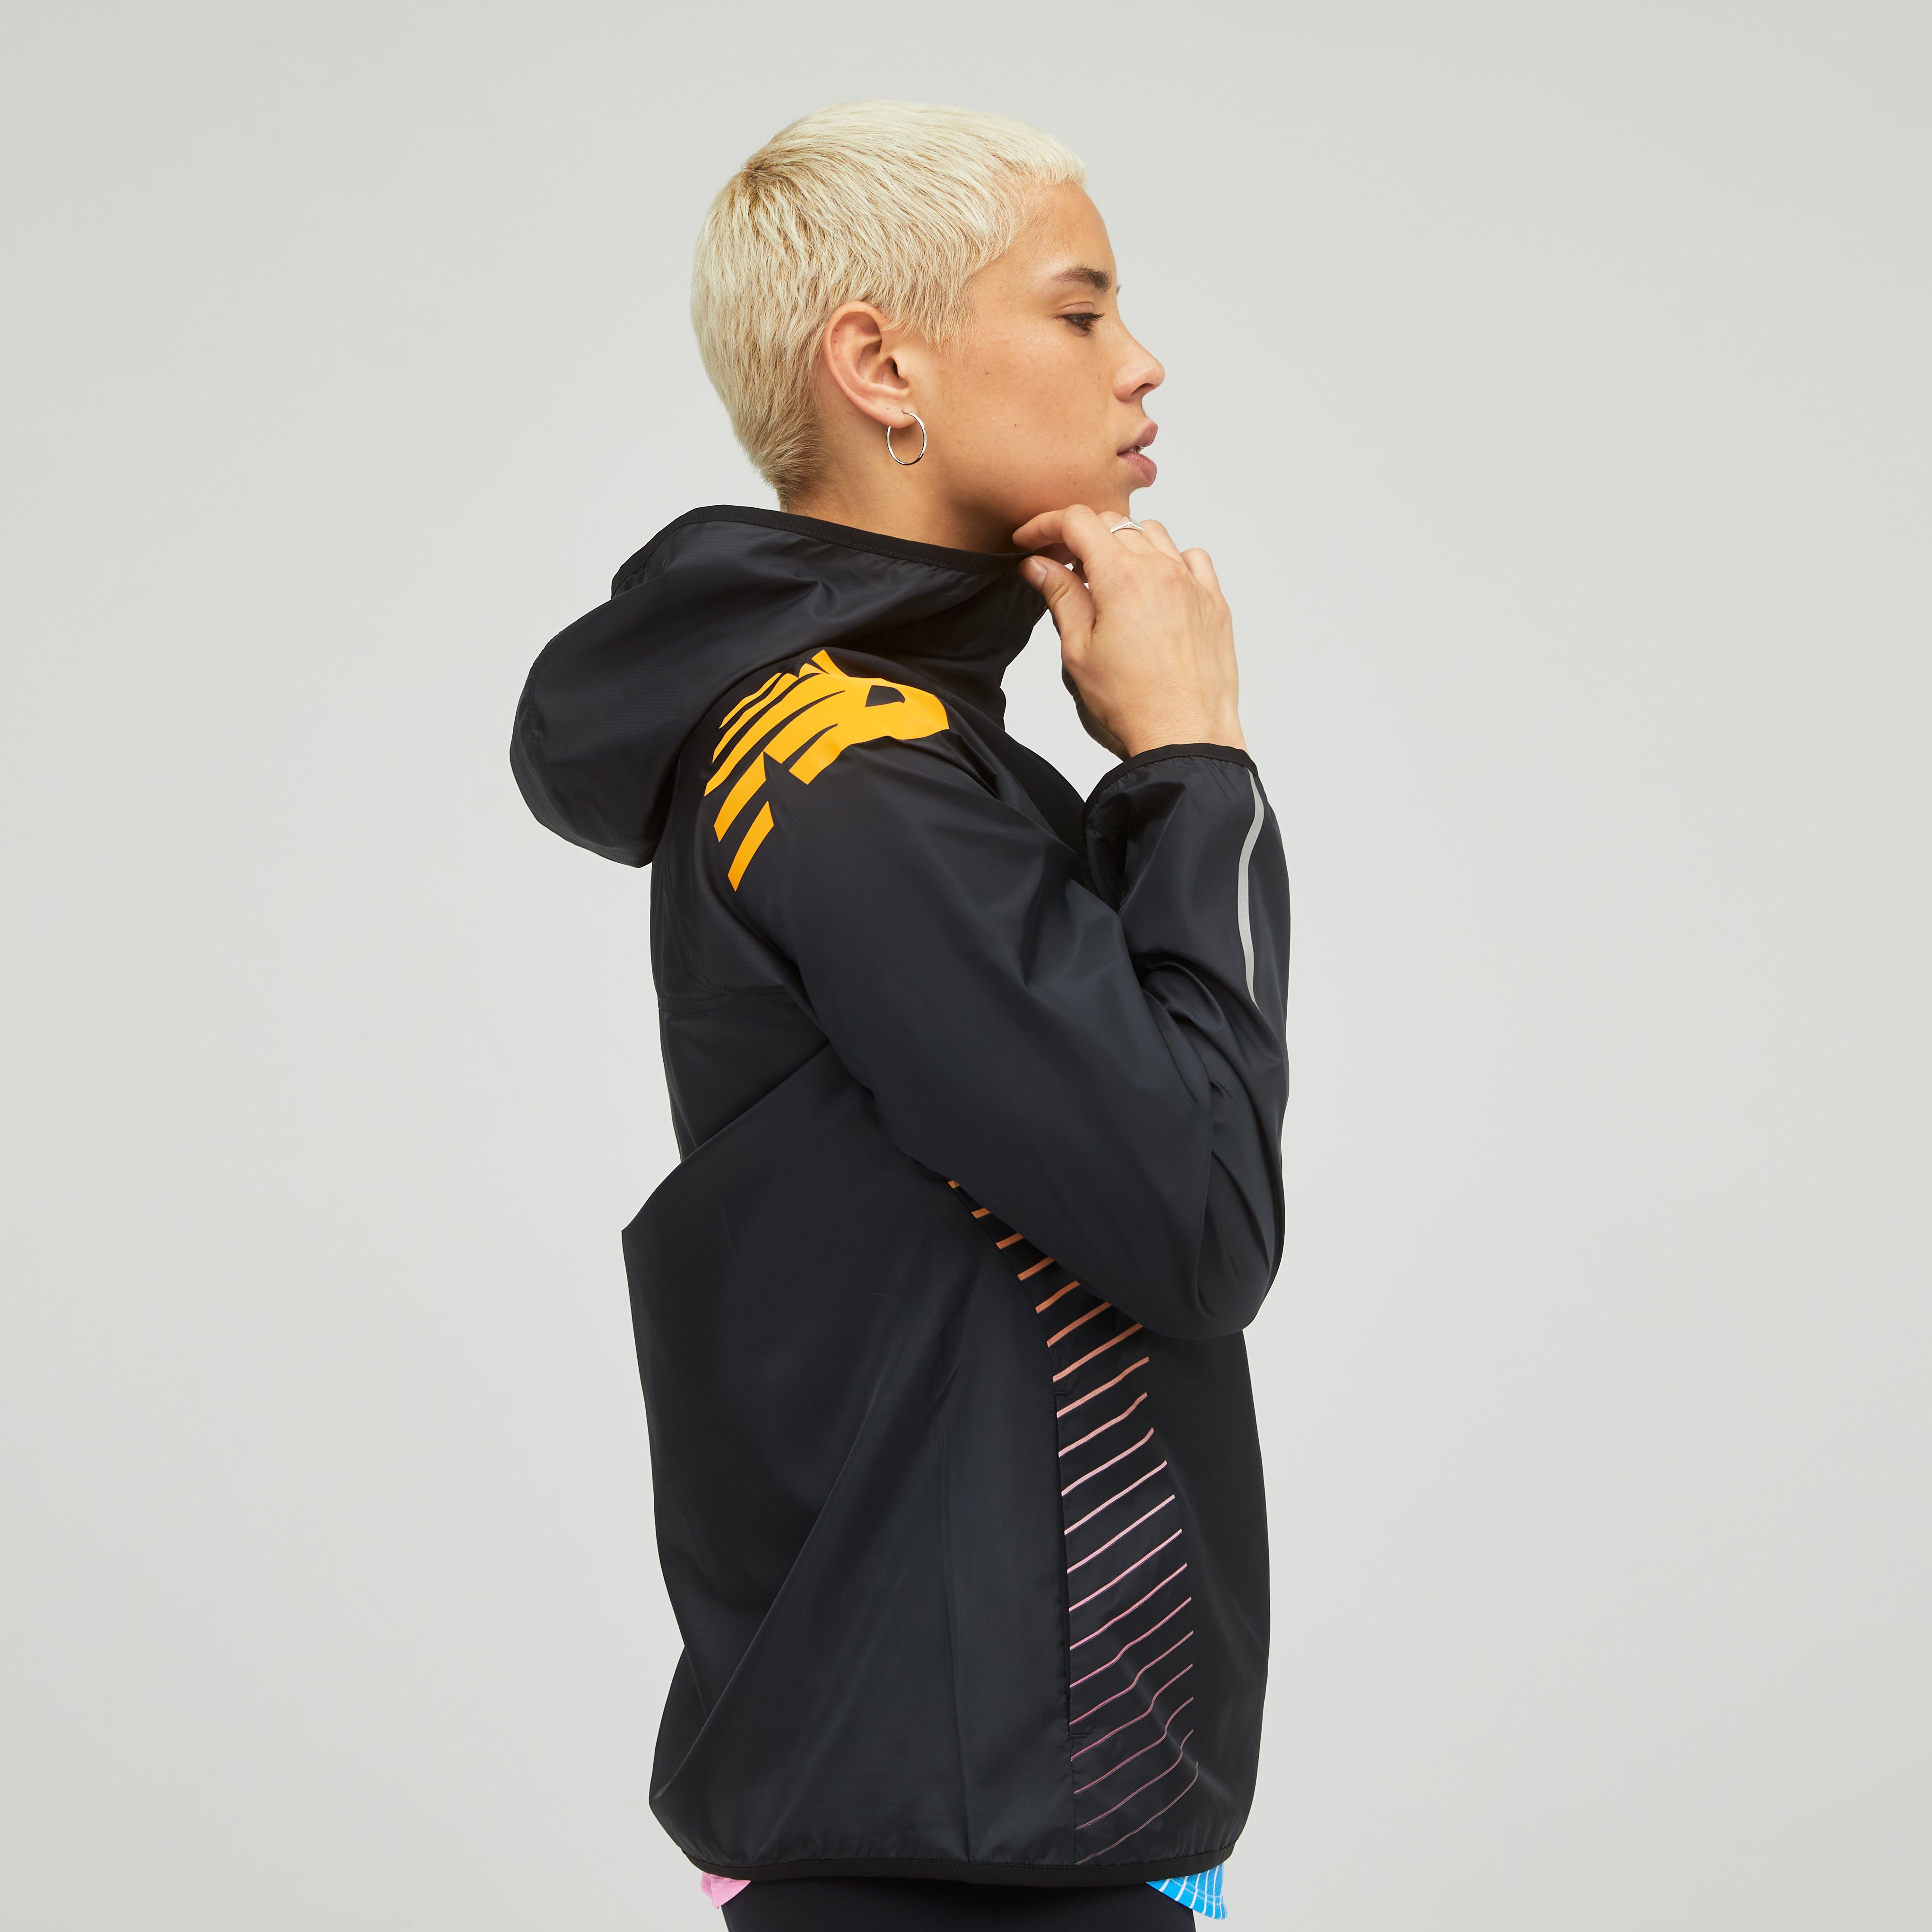 Womens Running Accelerate Jacket